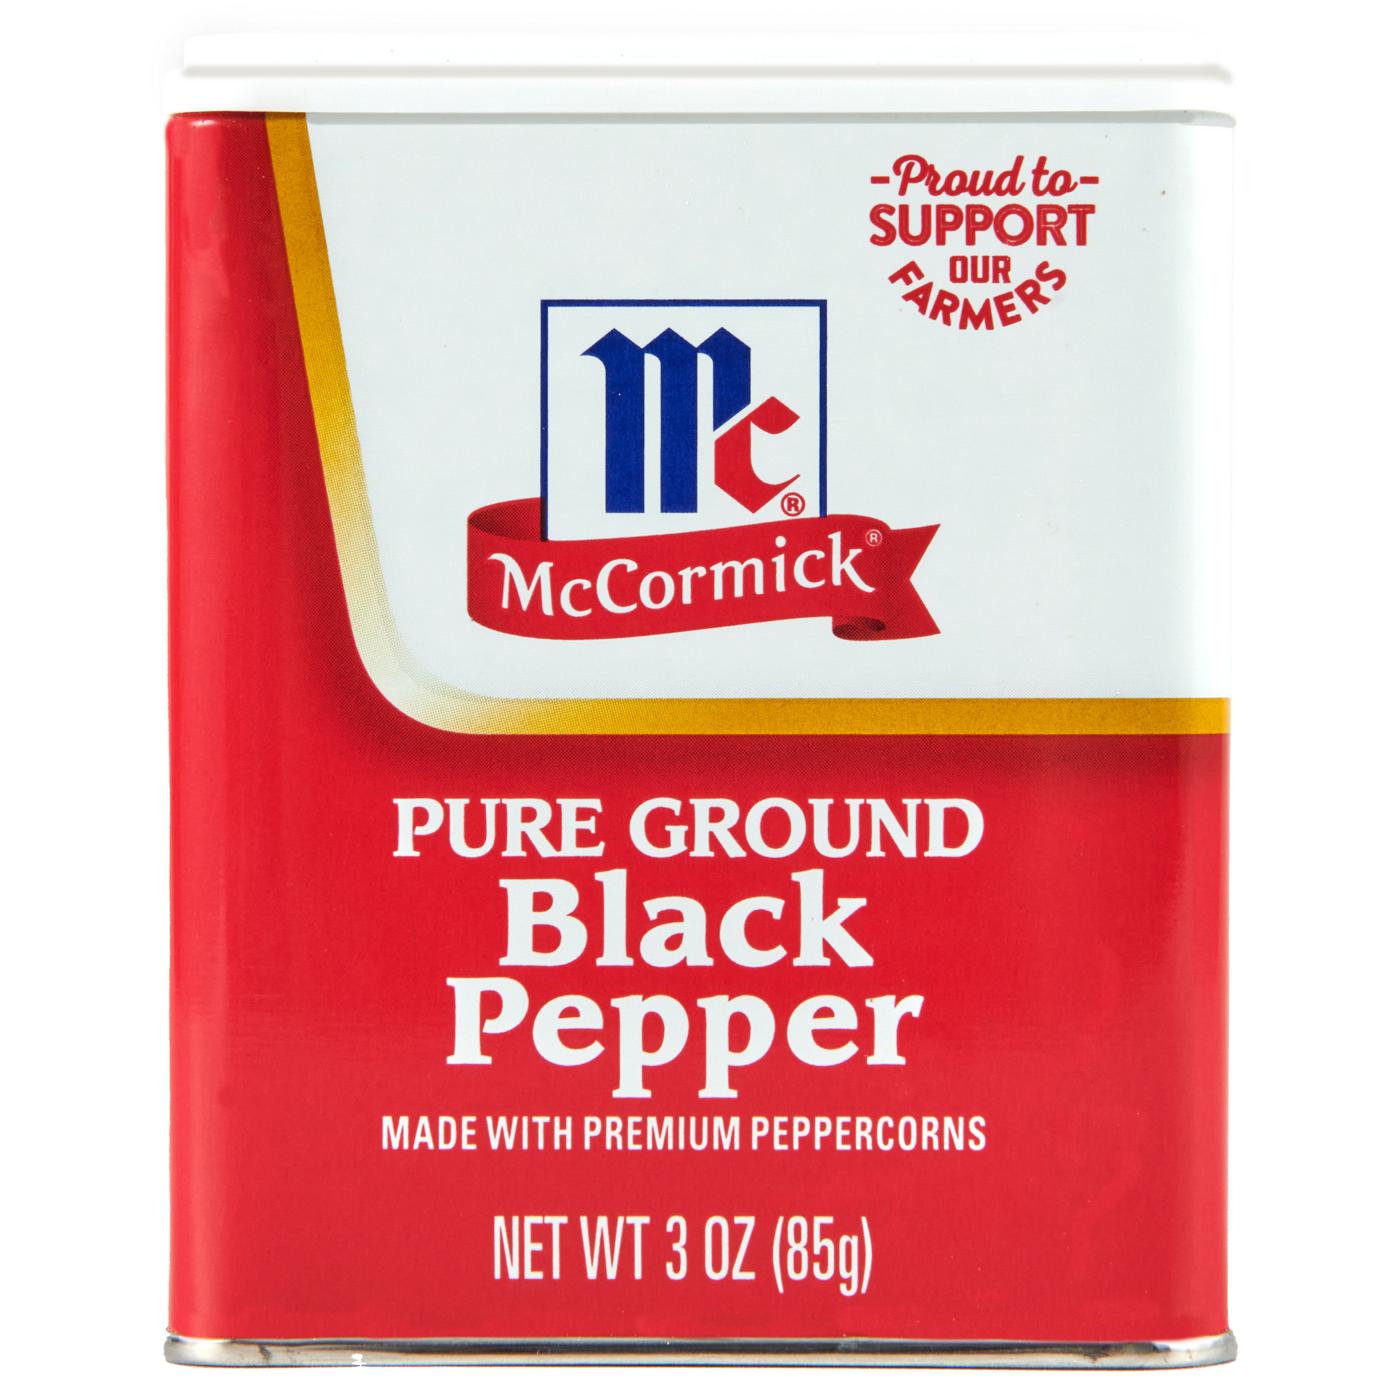 McCormick Pure Ground Black Pepper; image 1 of 12